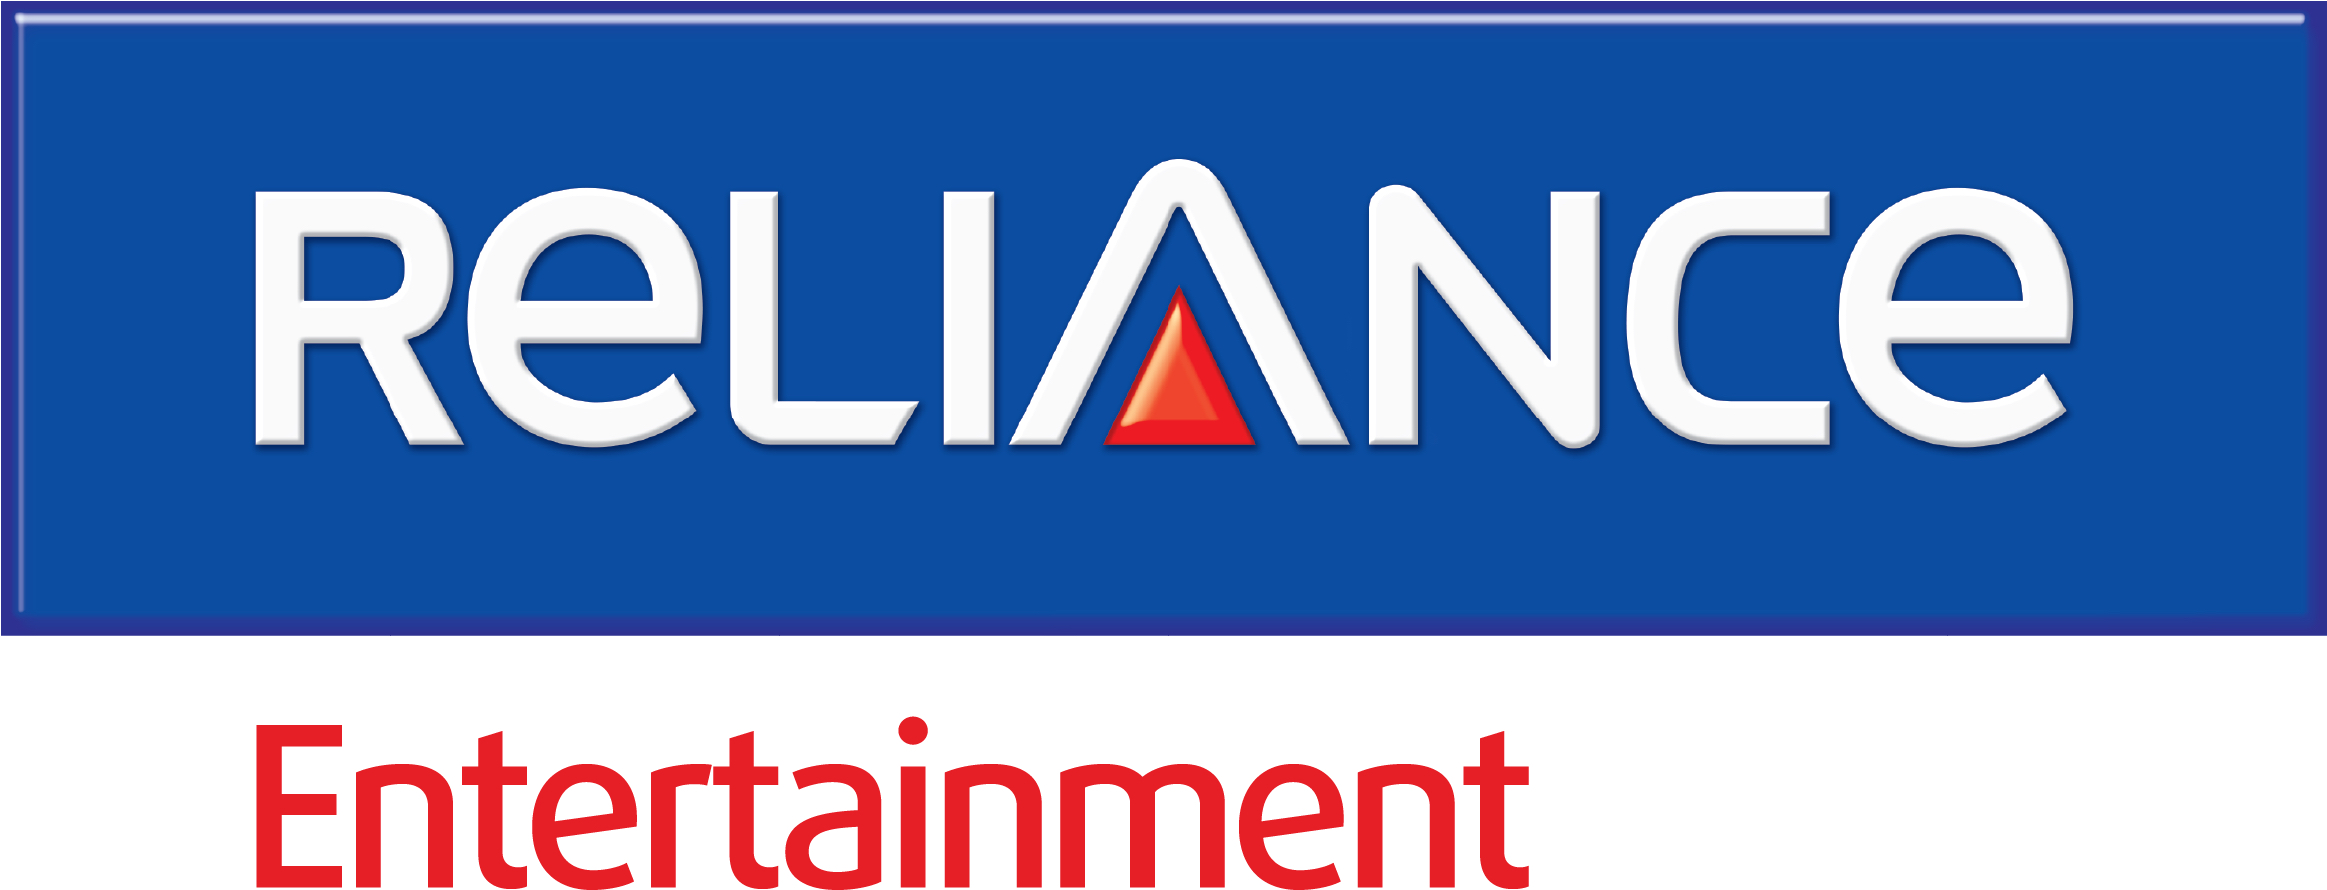 Reliance Entertainment Studios Private Limited